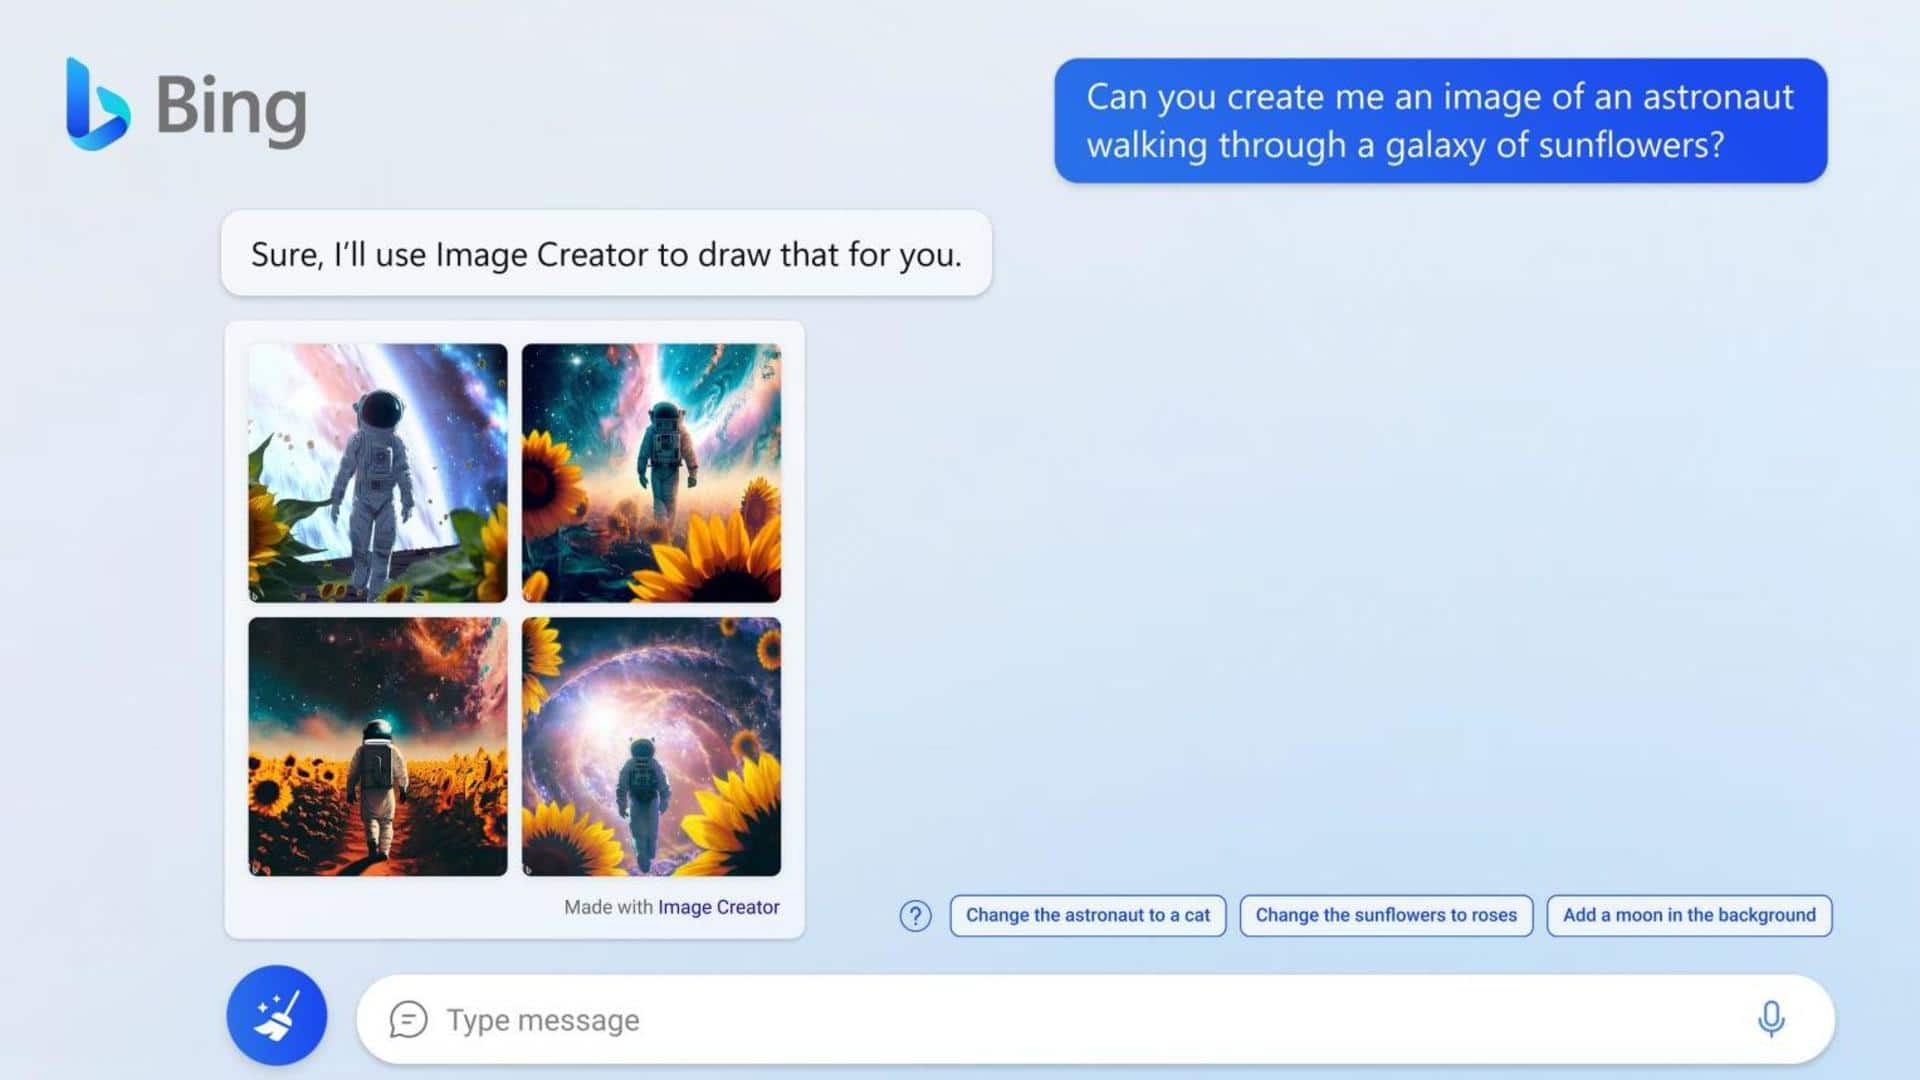 Here's how you can generate pictures using Bing Image Creator